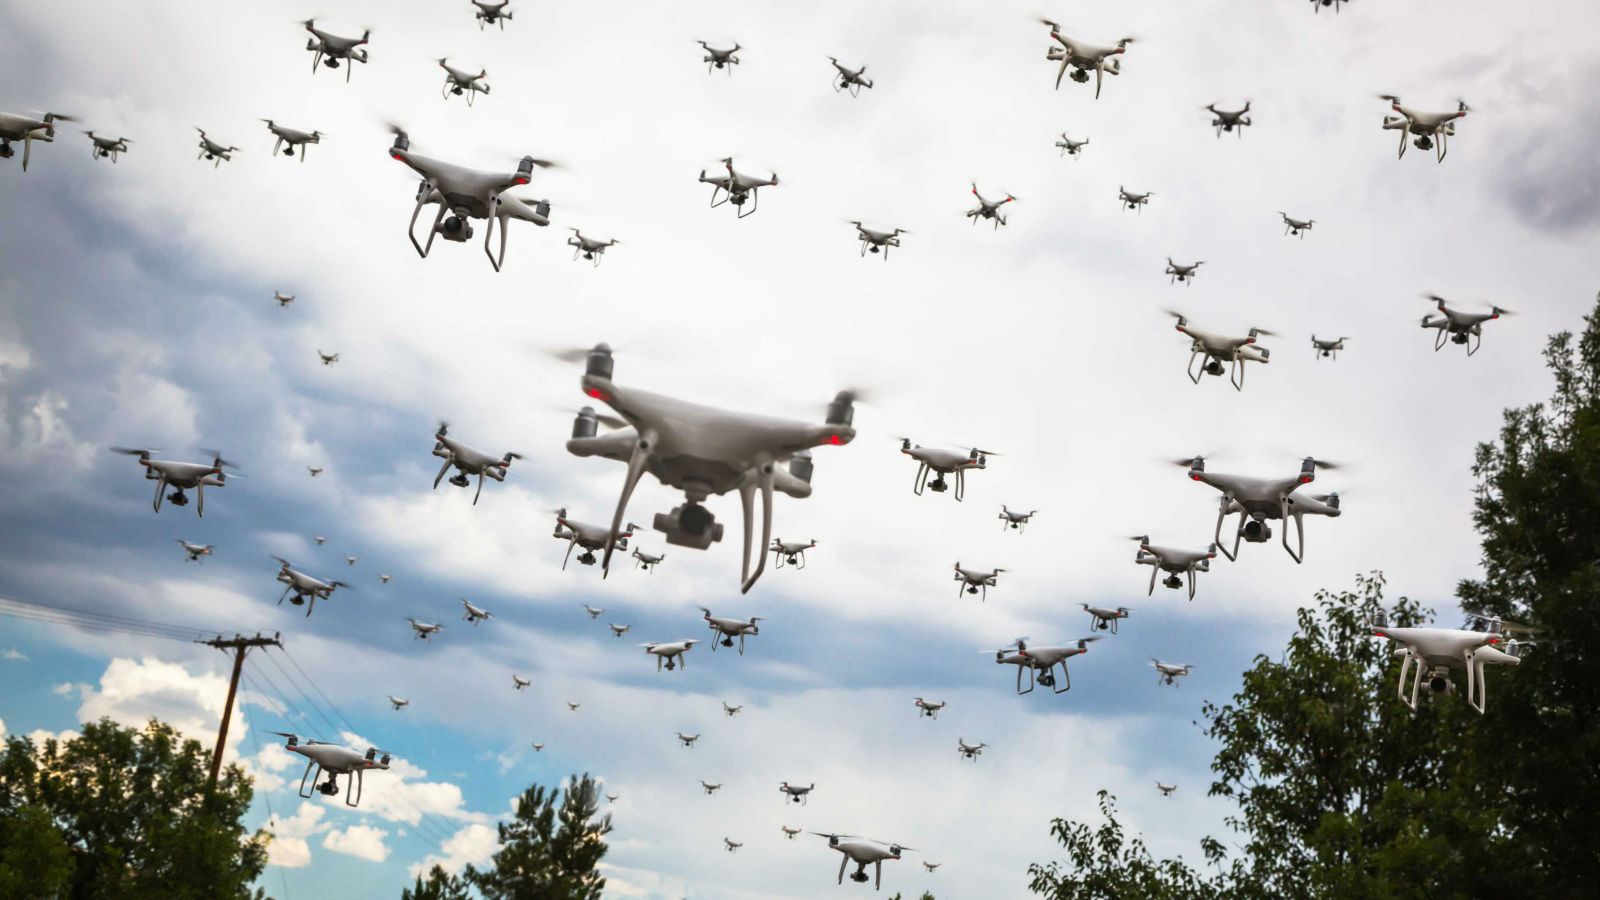 Swarm of autonomous lethal drones flying over a street